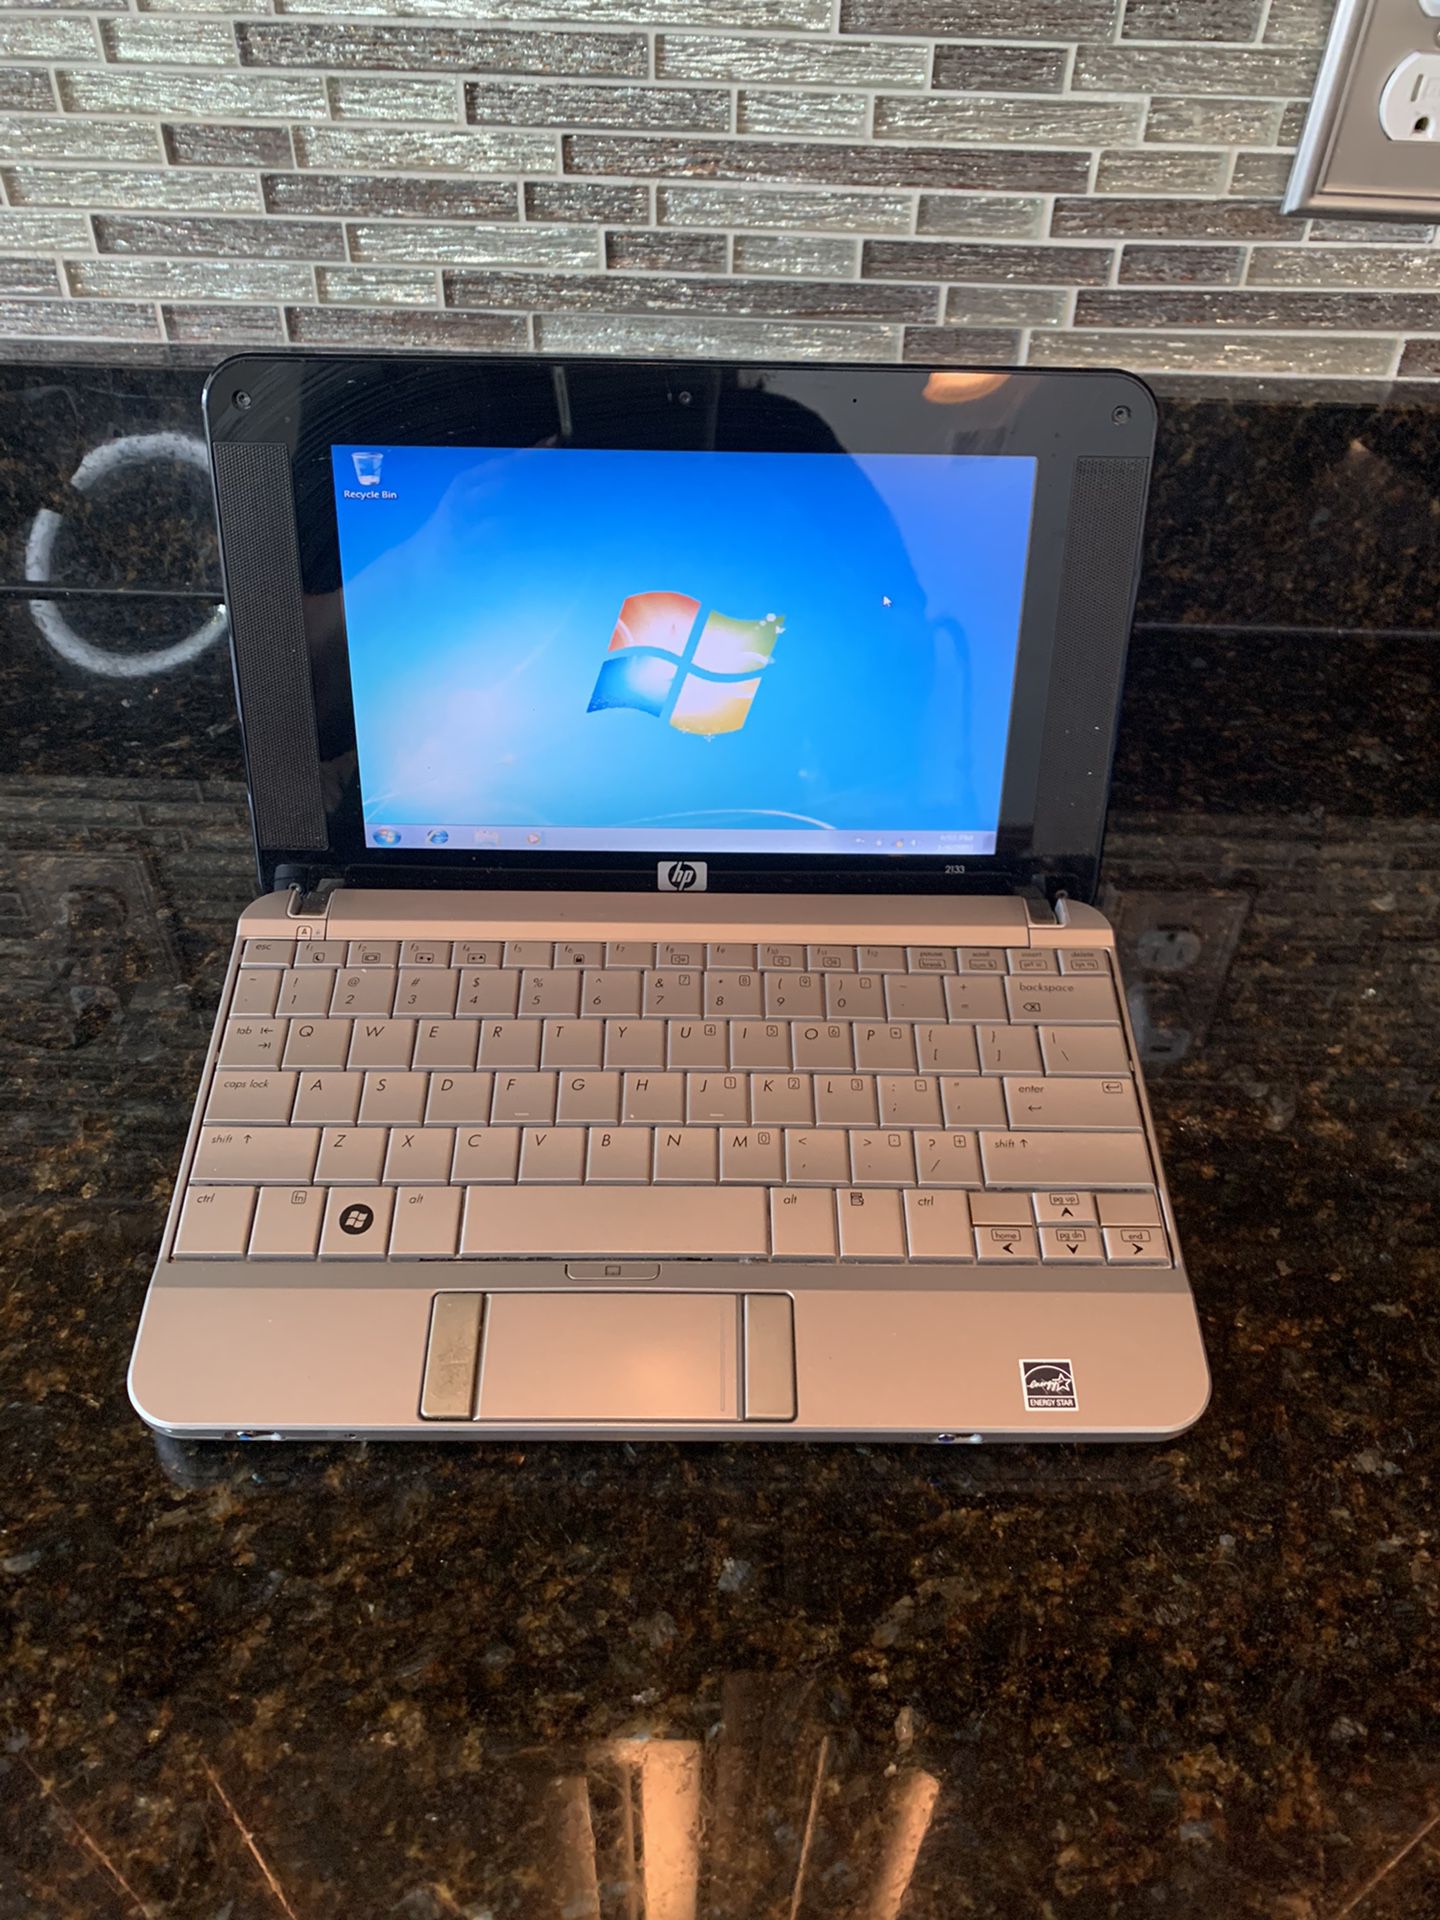 10" HP 2133 Mini Laptop With Webcam, Windows 7 and Microsoft Office.